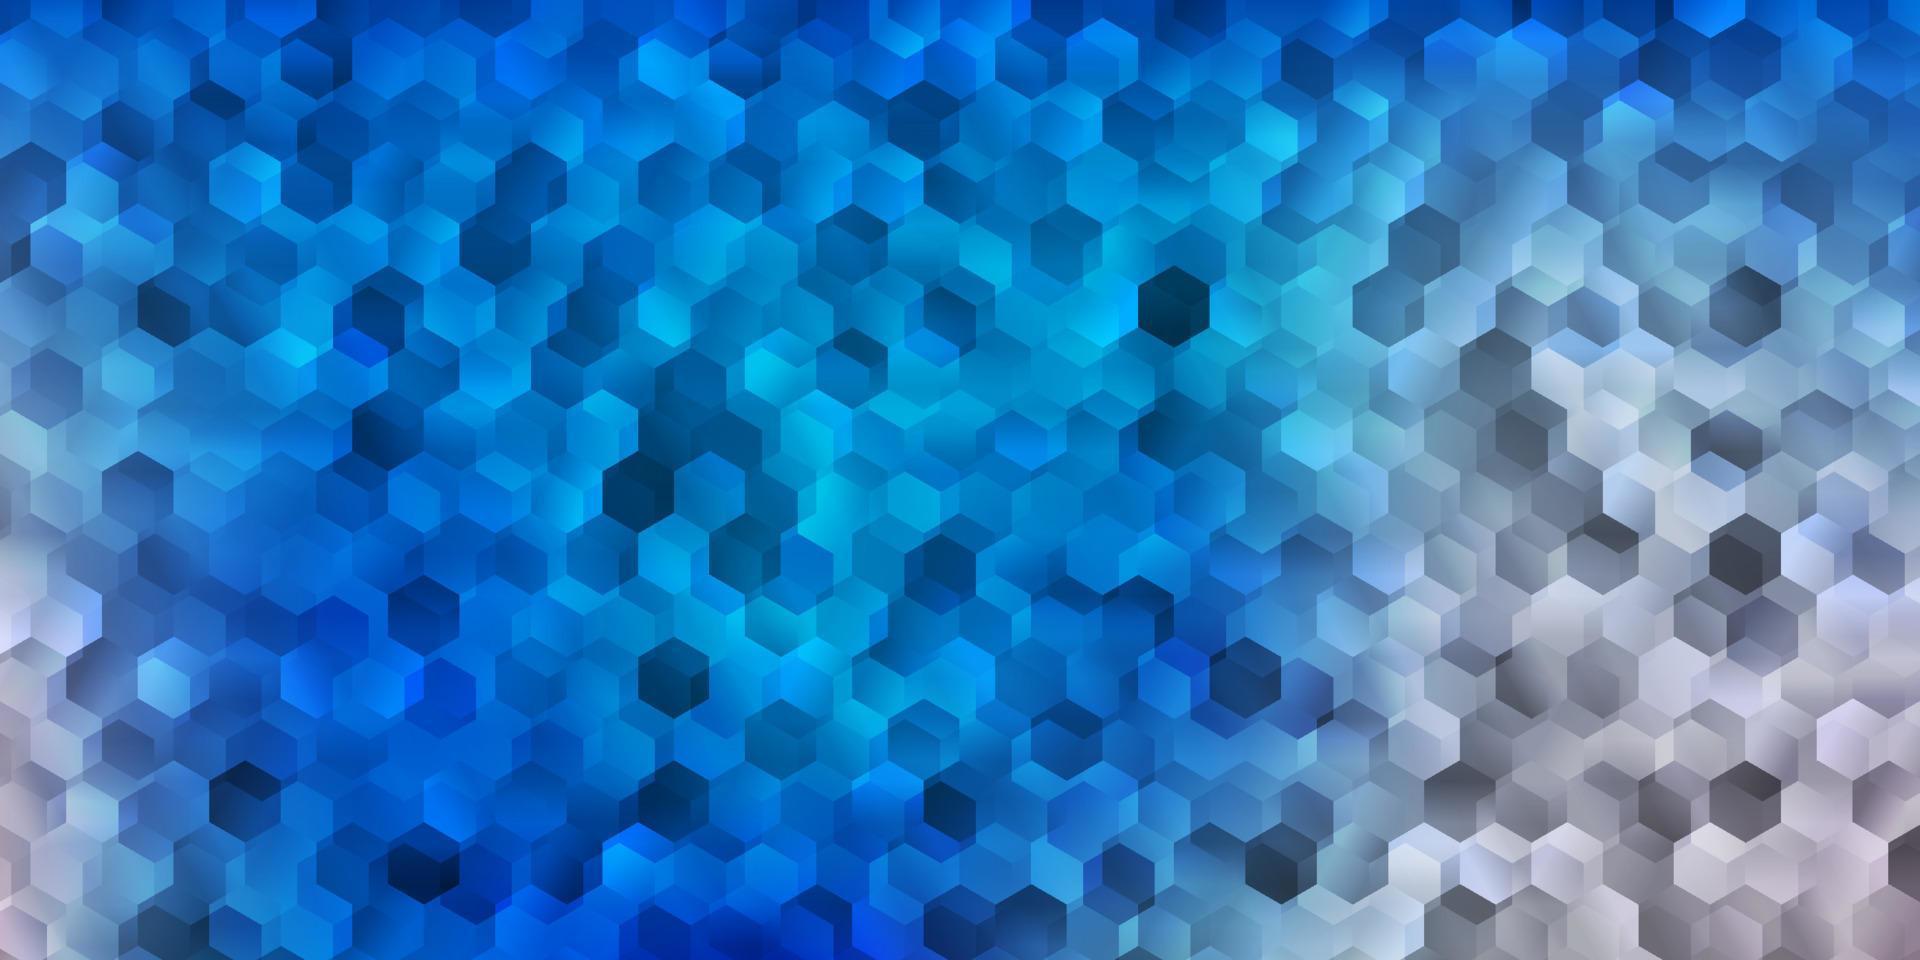 Light blue, yellow vector background with hexagonal shapes.